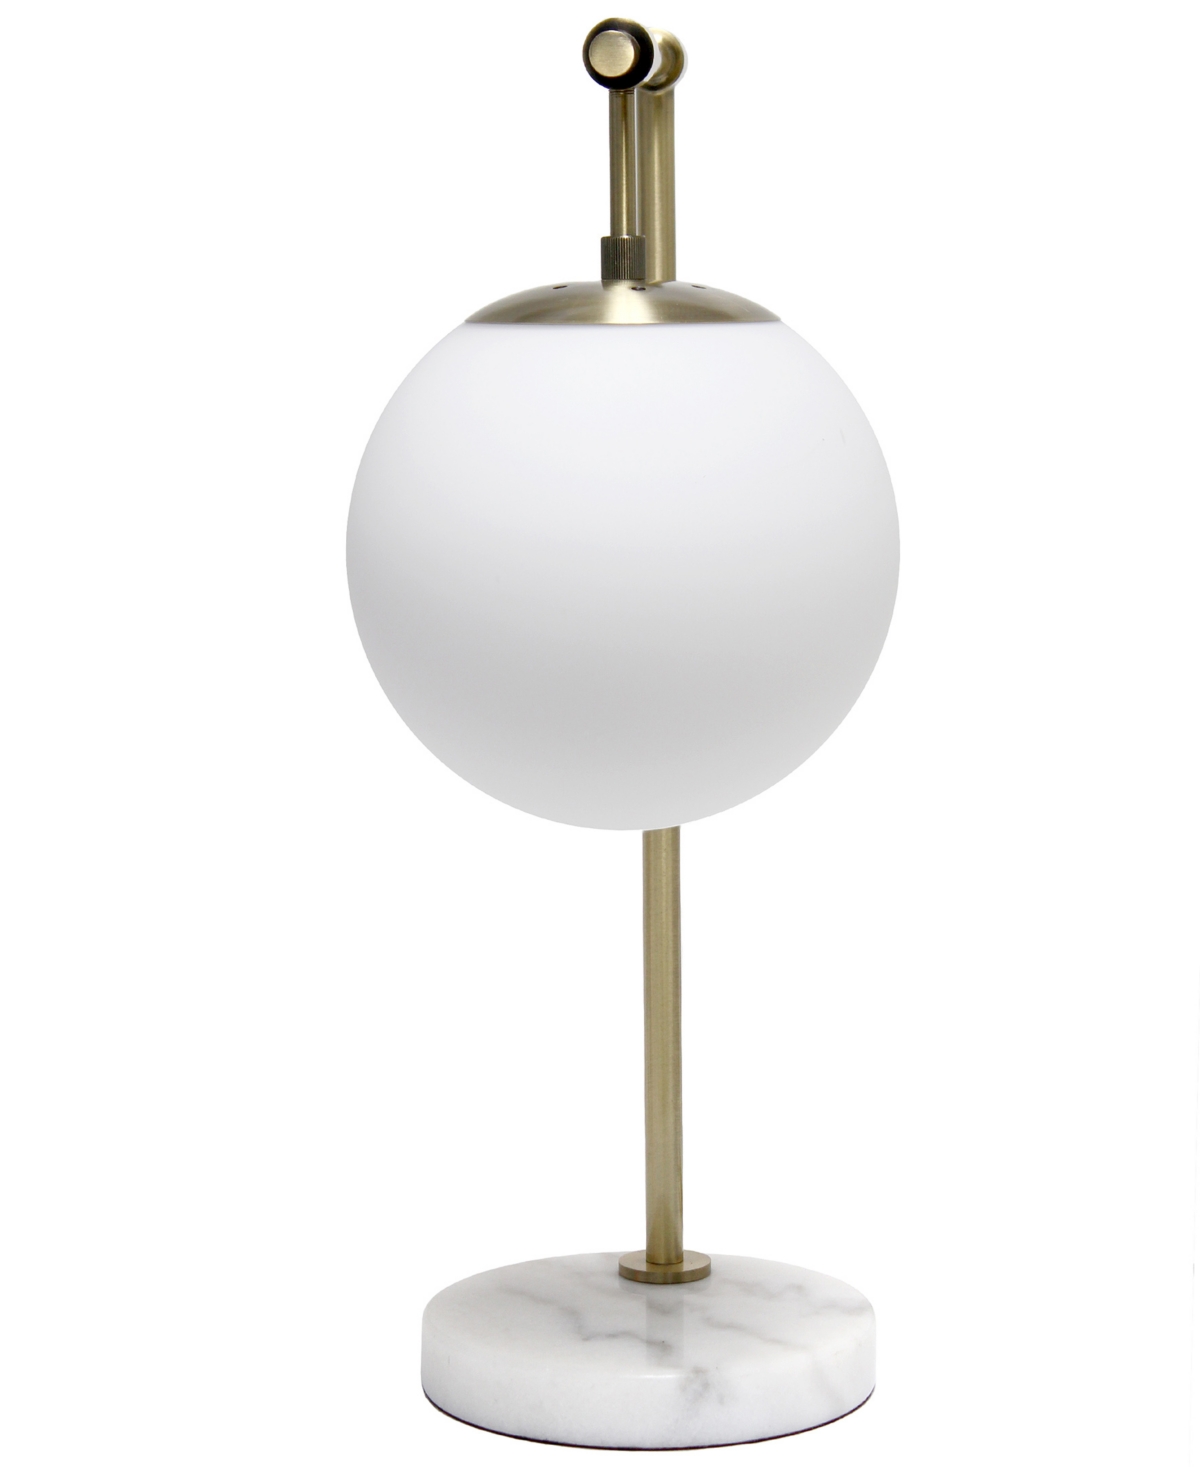 Shop Lalia Home Studio Loft 21" White Globe Shade Table Desk Lamp With Marble Base And Antique Brass Arm